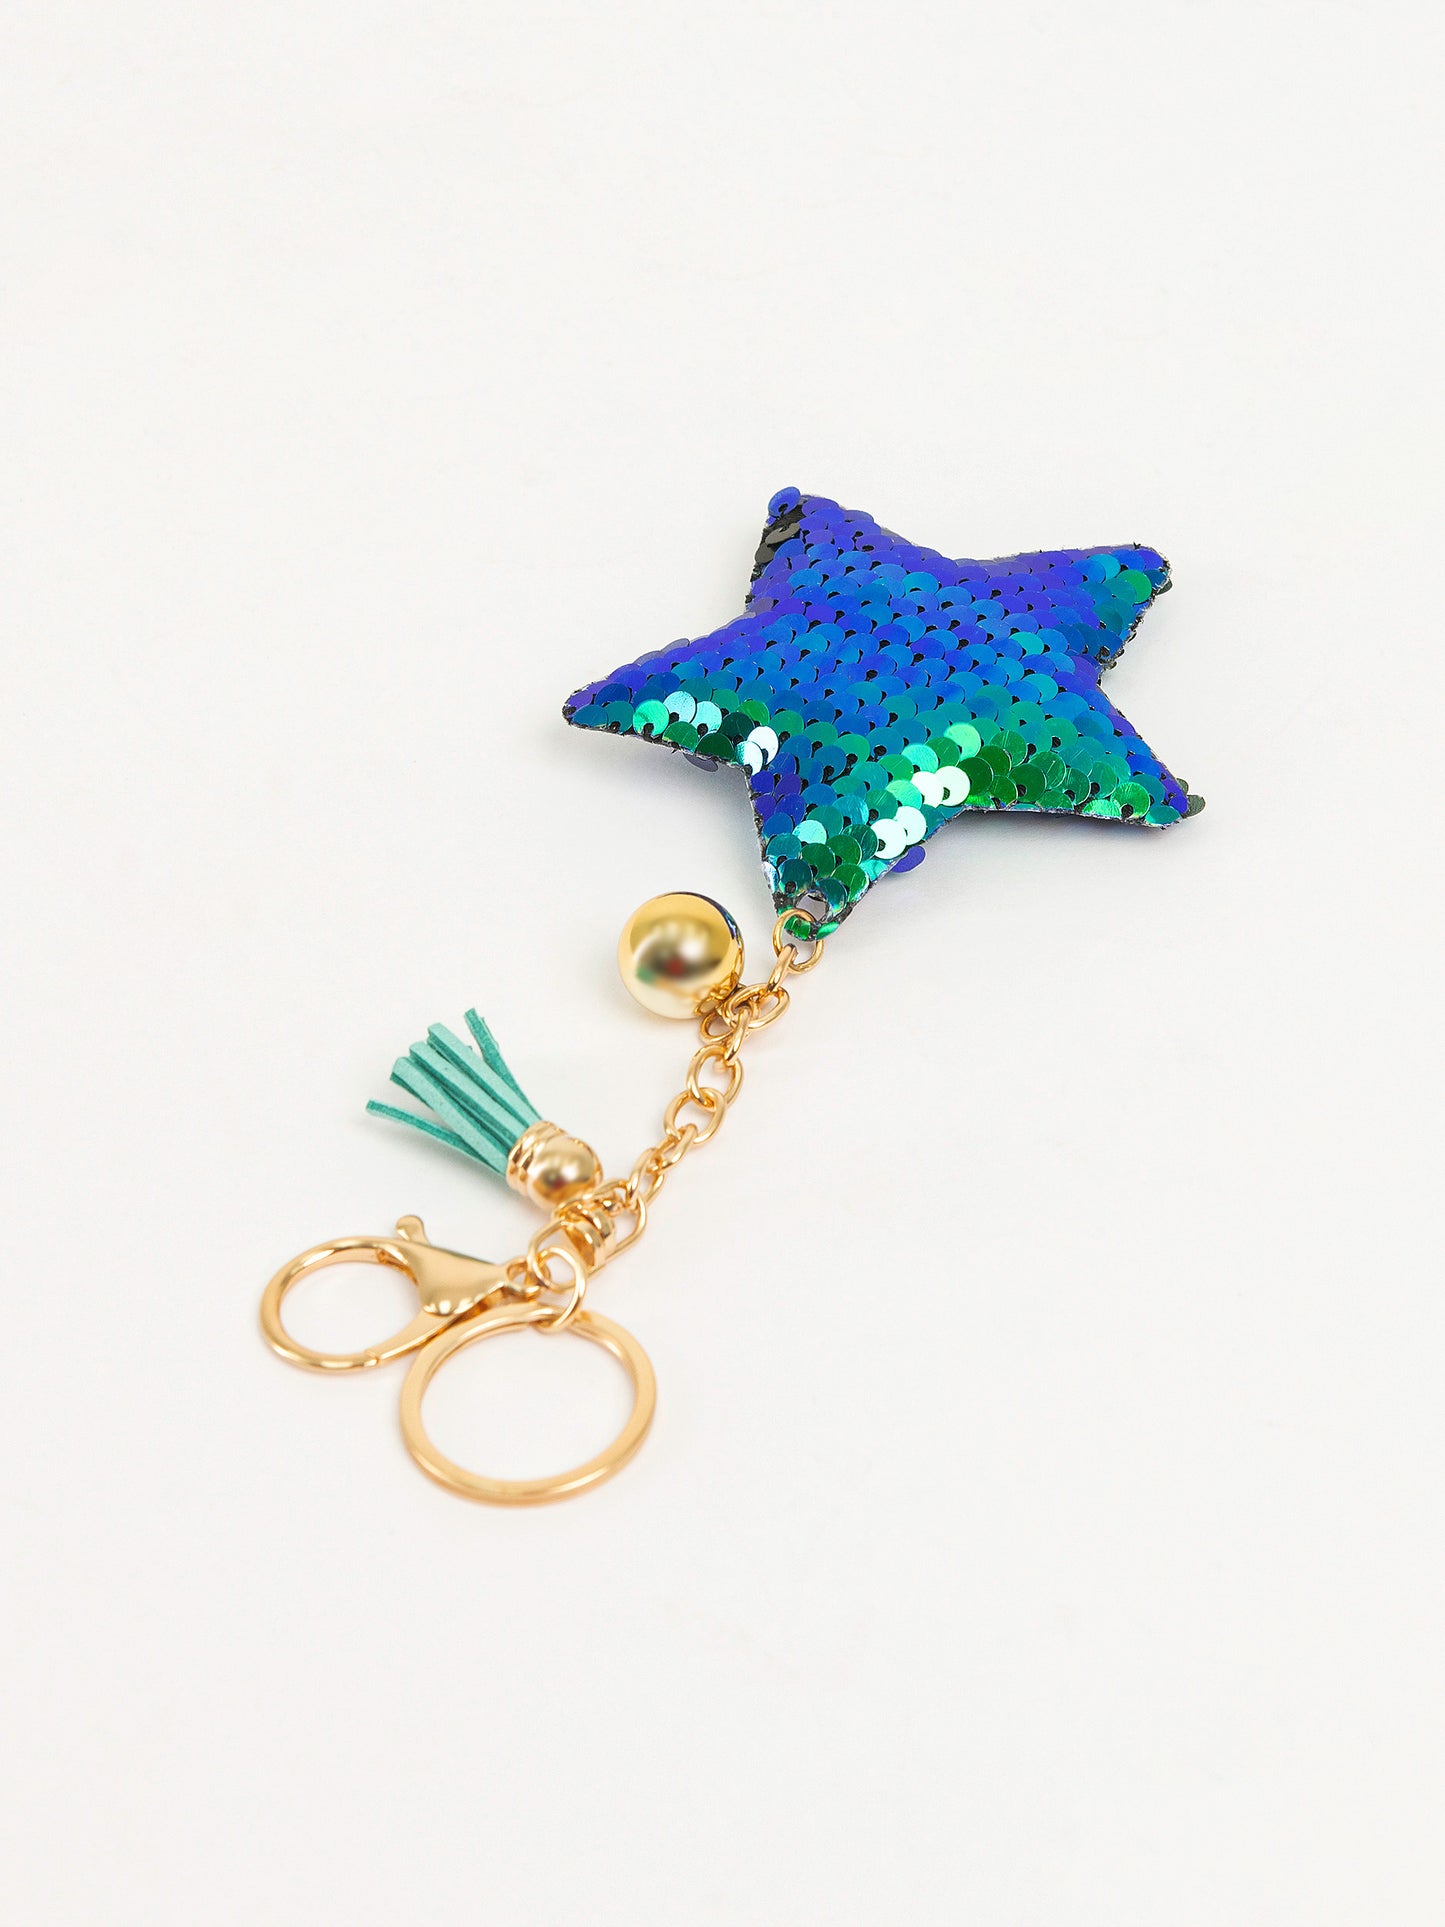 Sequined Star Keychain